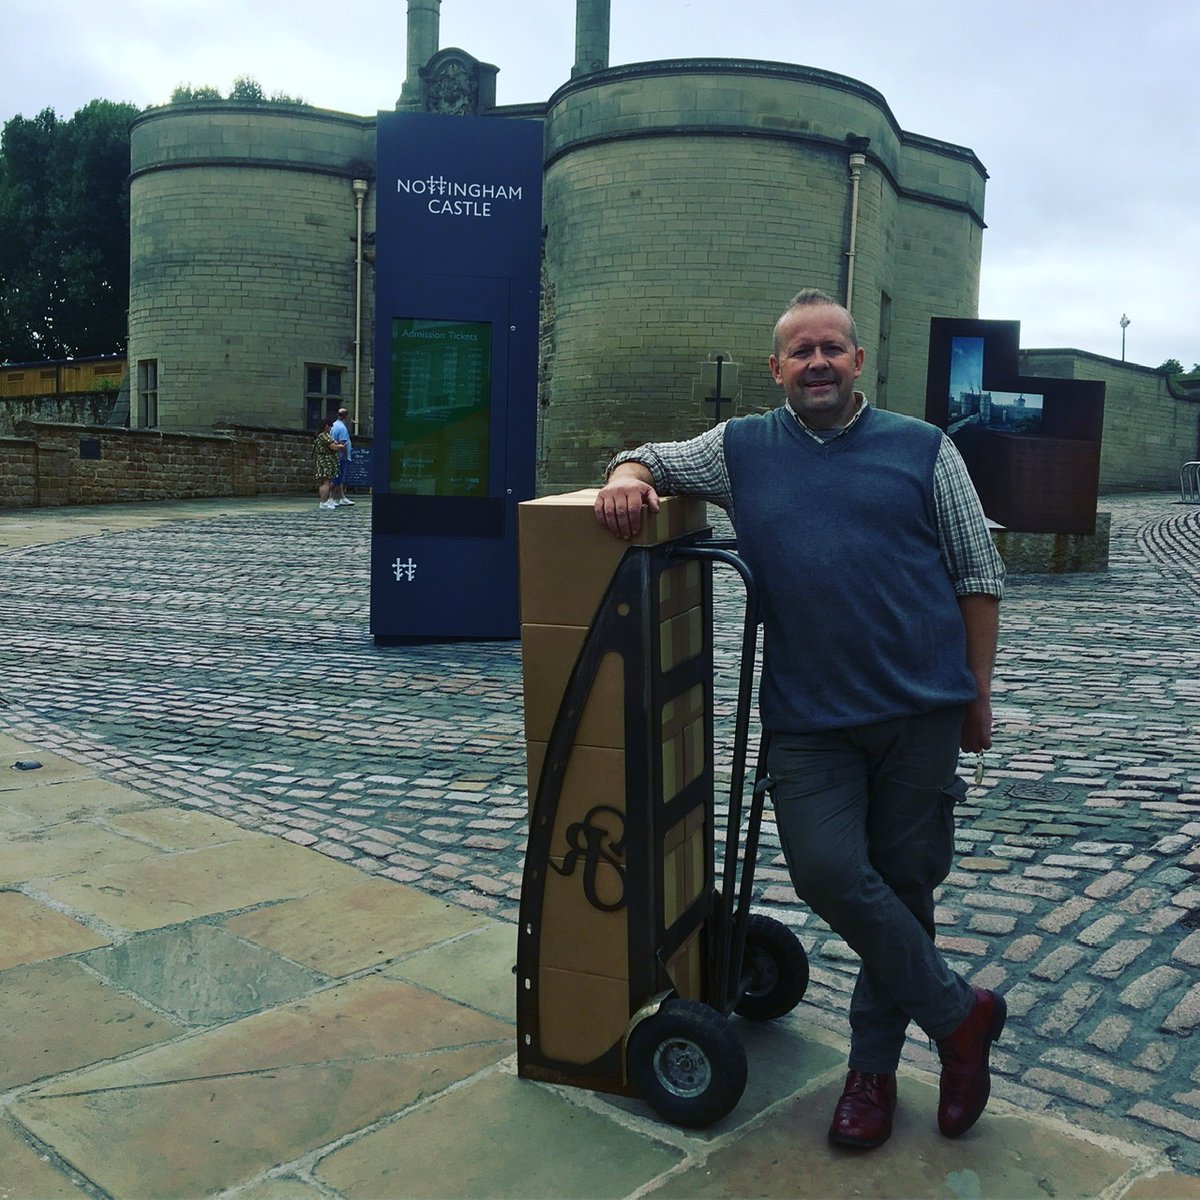 Brand #NewGin delivered to @NottmCastle #NottinghamCastleGin now available in the Castle gift shop #NottinghamGin #Nottingham #MadeInNottingham